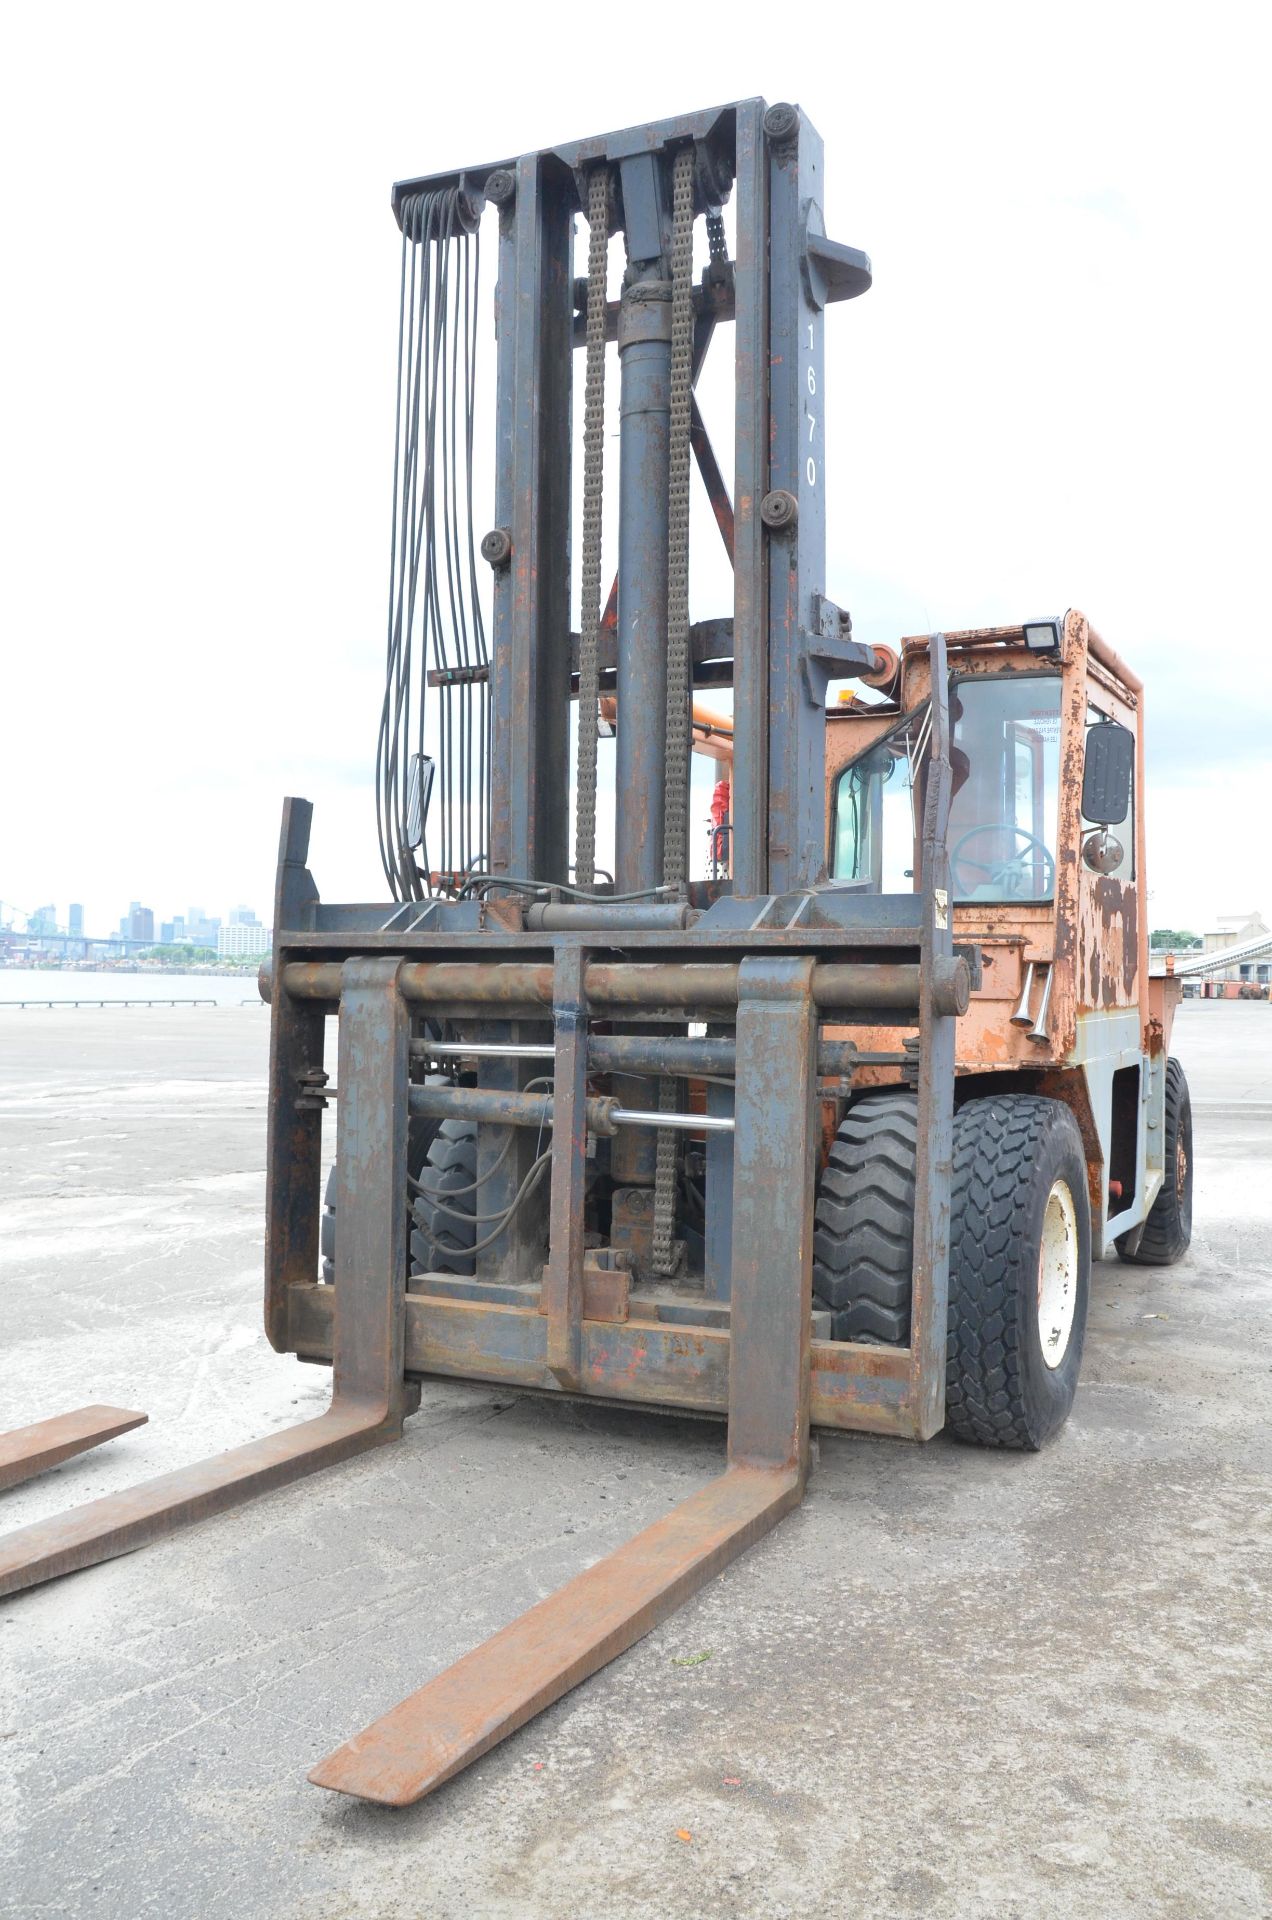 TAYLOR Y62 WOM HEAVY DUTY OUTDOOR DIESEL FORKLIFT WITH 62,000 LBS. CAPACITY - Image 2 of 21